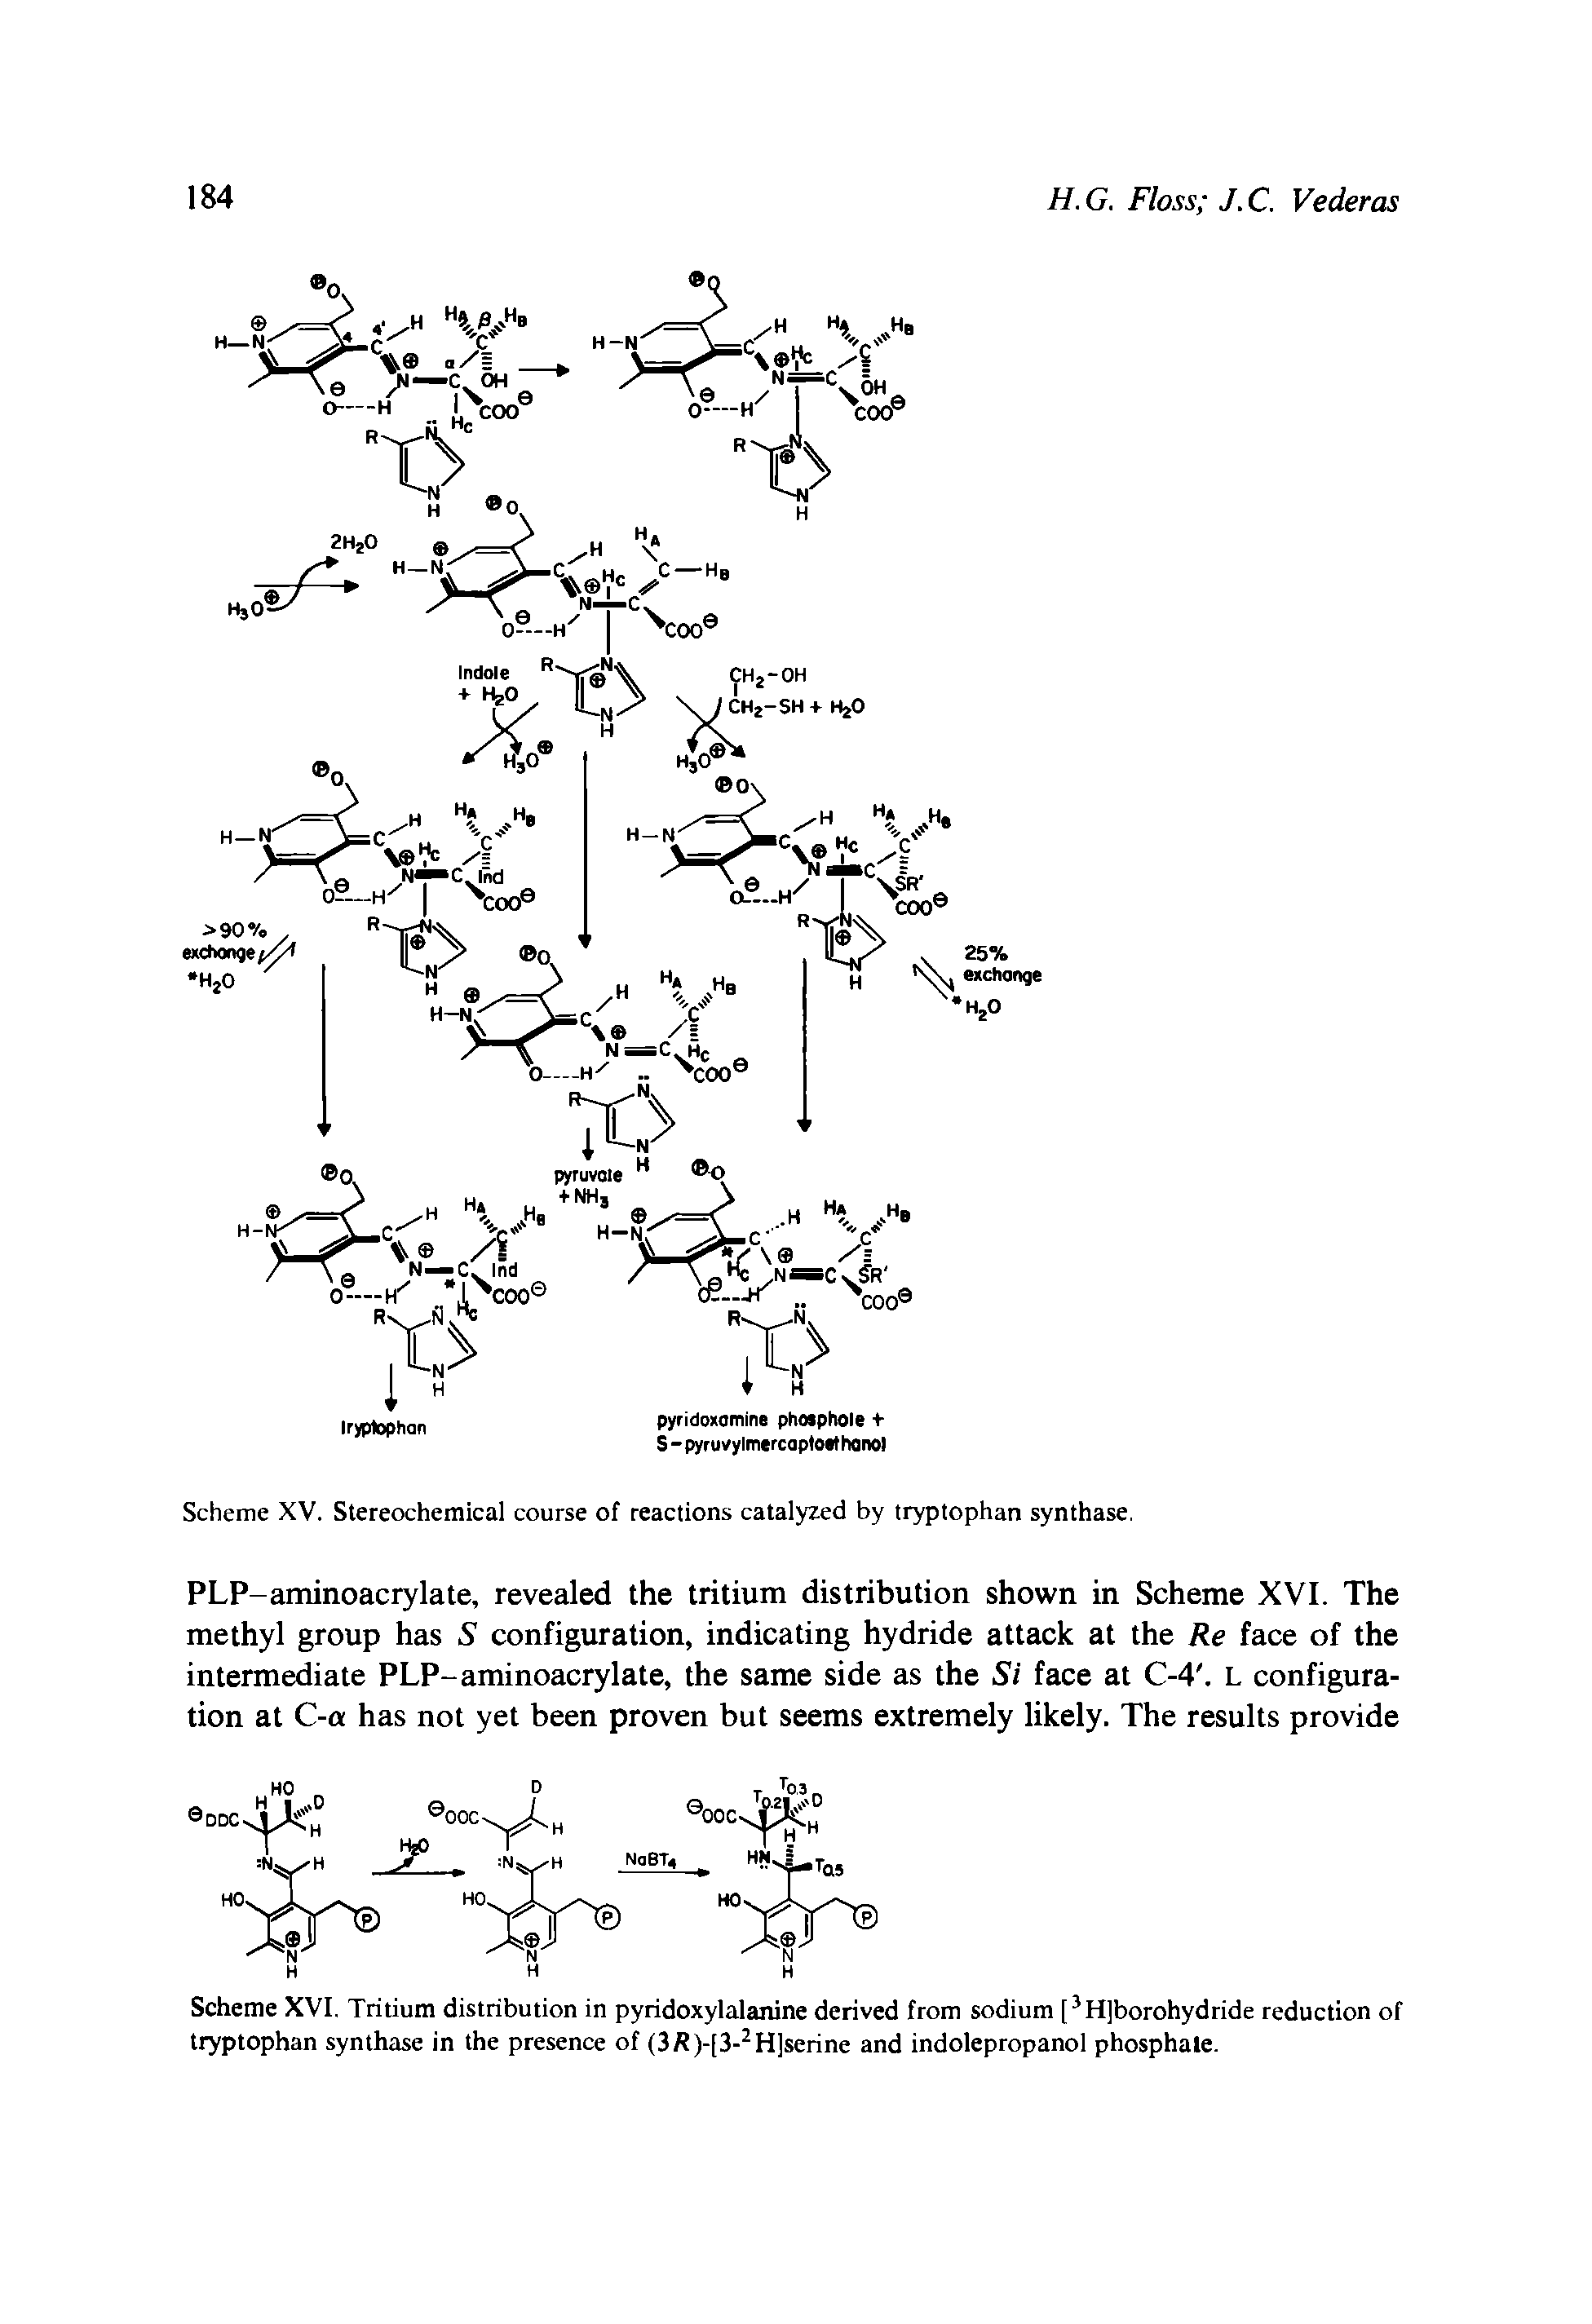 Scheme XV. Stereochemical course of reactions catalyzed by tryptophan synthase.